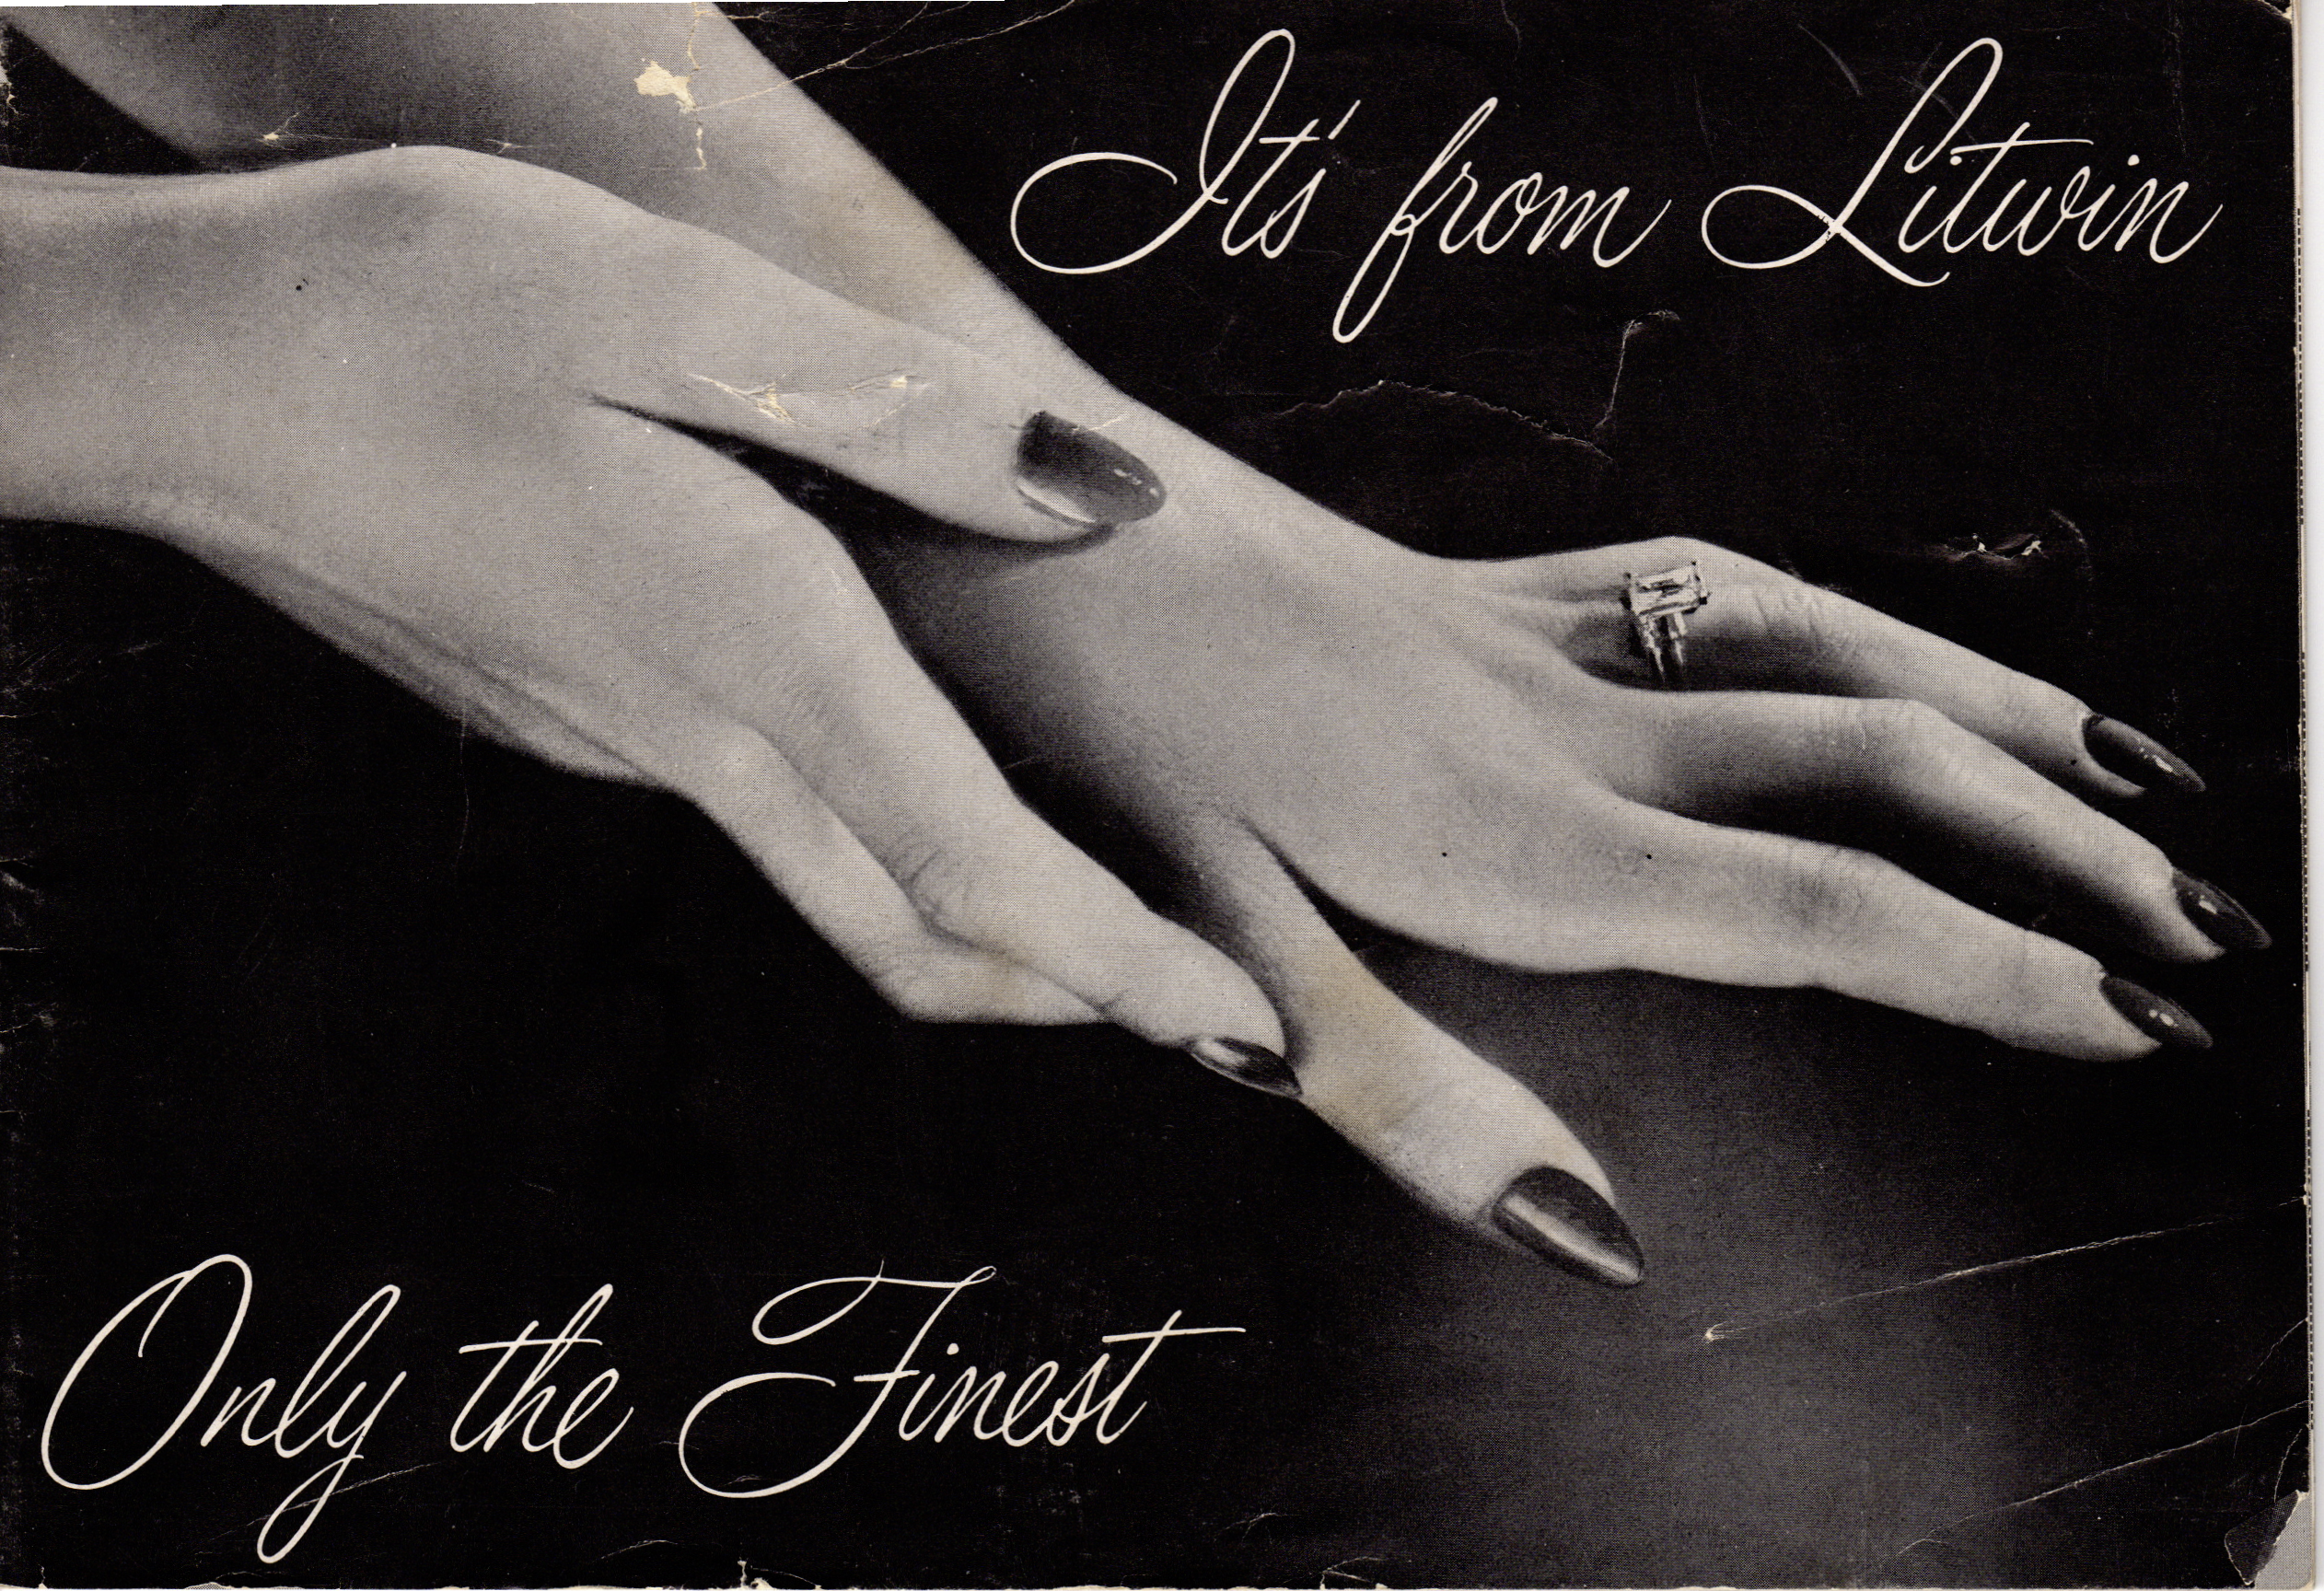 Image from Litwin Diamond Cutters Catalog showing a woman’s hands and a diamond ring on the left hand and fourth finger. The image text says: It’s from Litwin Only the Finest showing